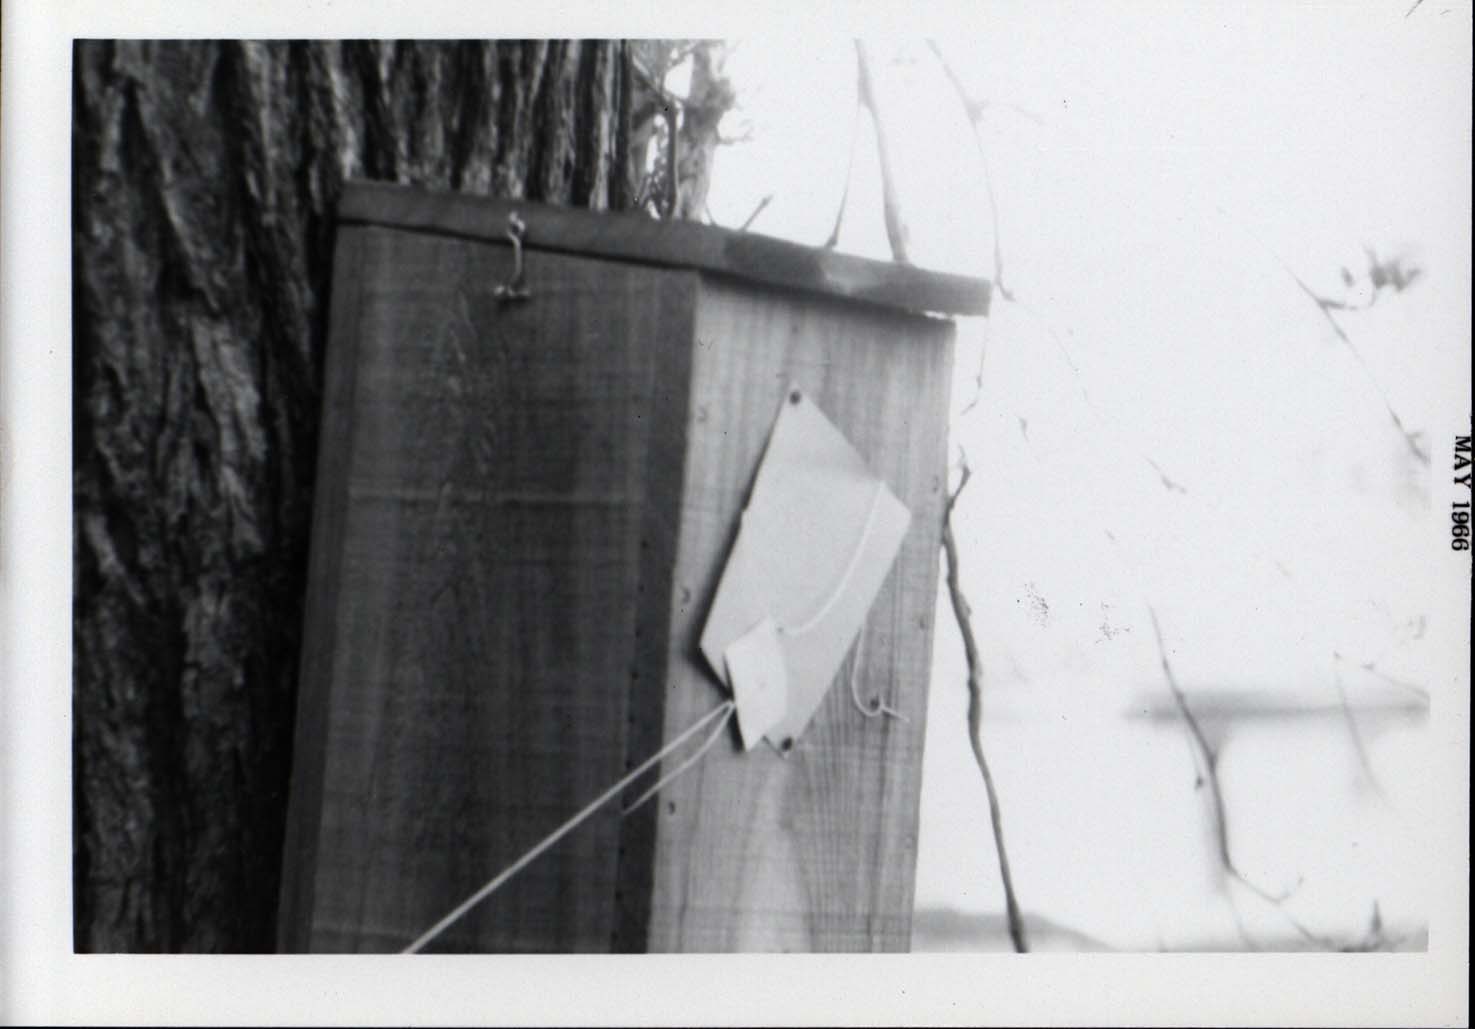 Photograph of paper covering the entrance to a Wood Duck house